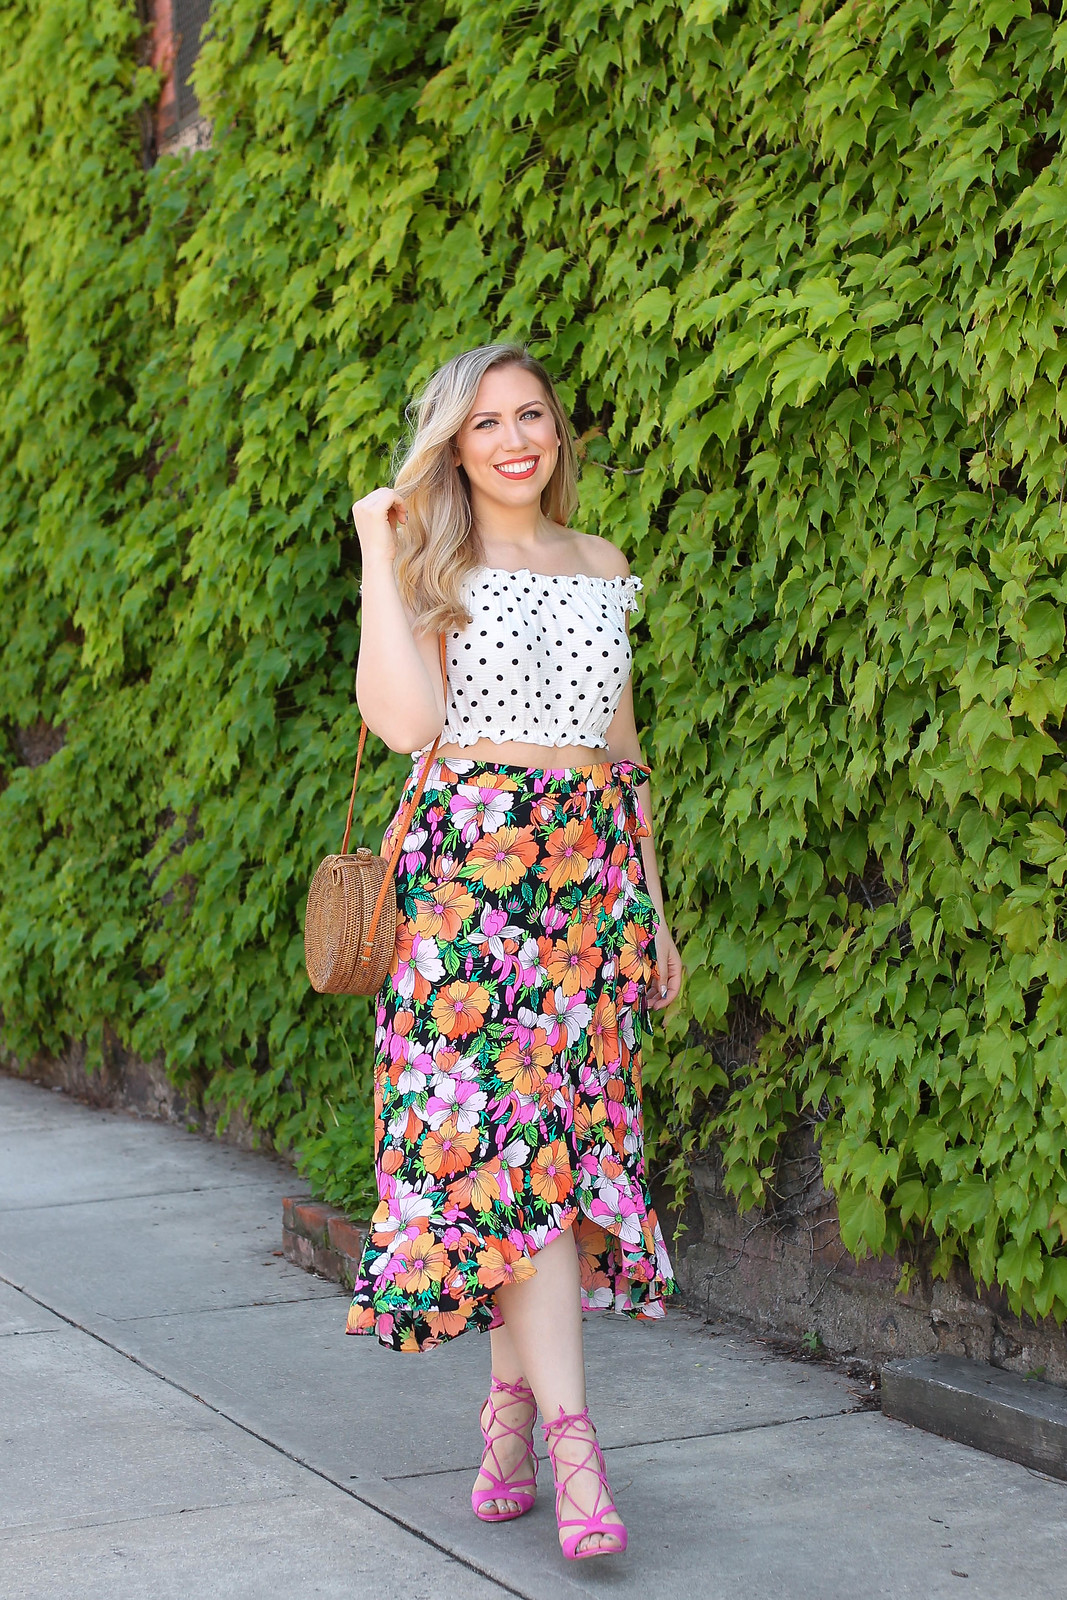 Topshop Polka Dot Crop Top Bright Tropical Petal Midi Skirt Nordstrom Westchester Vacation Outfit Fashion Pink Lace Up Sandals Jackie Giardina Living After Midnite